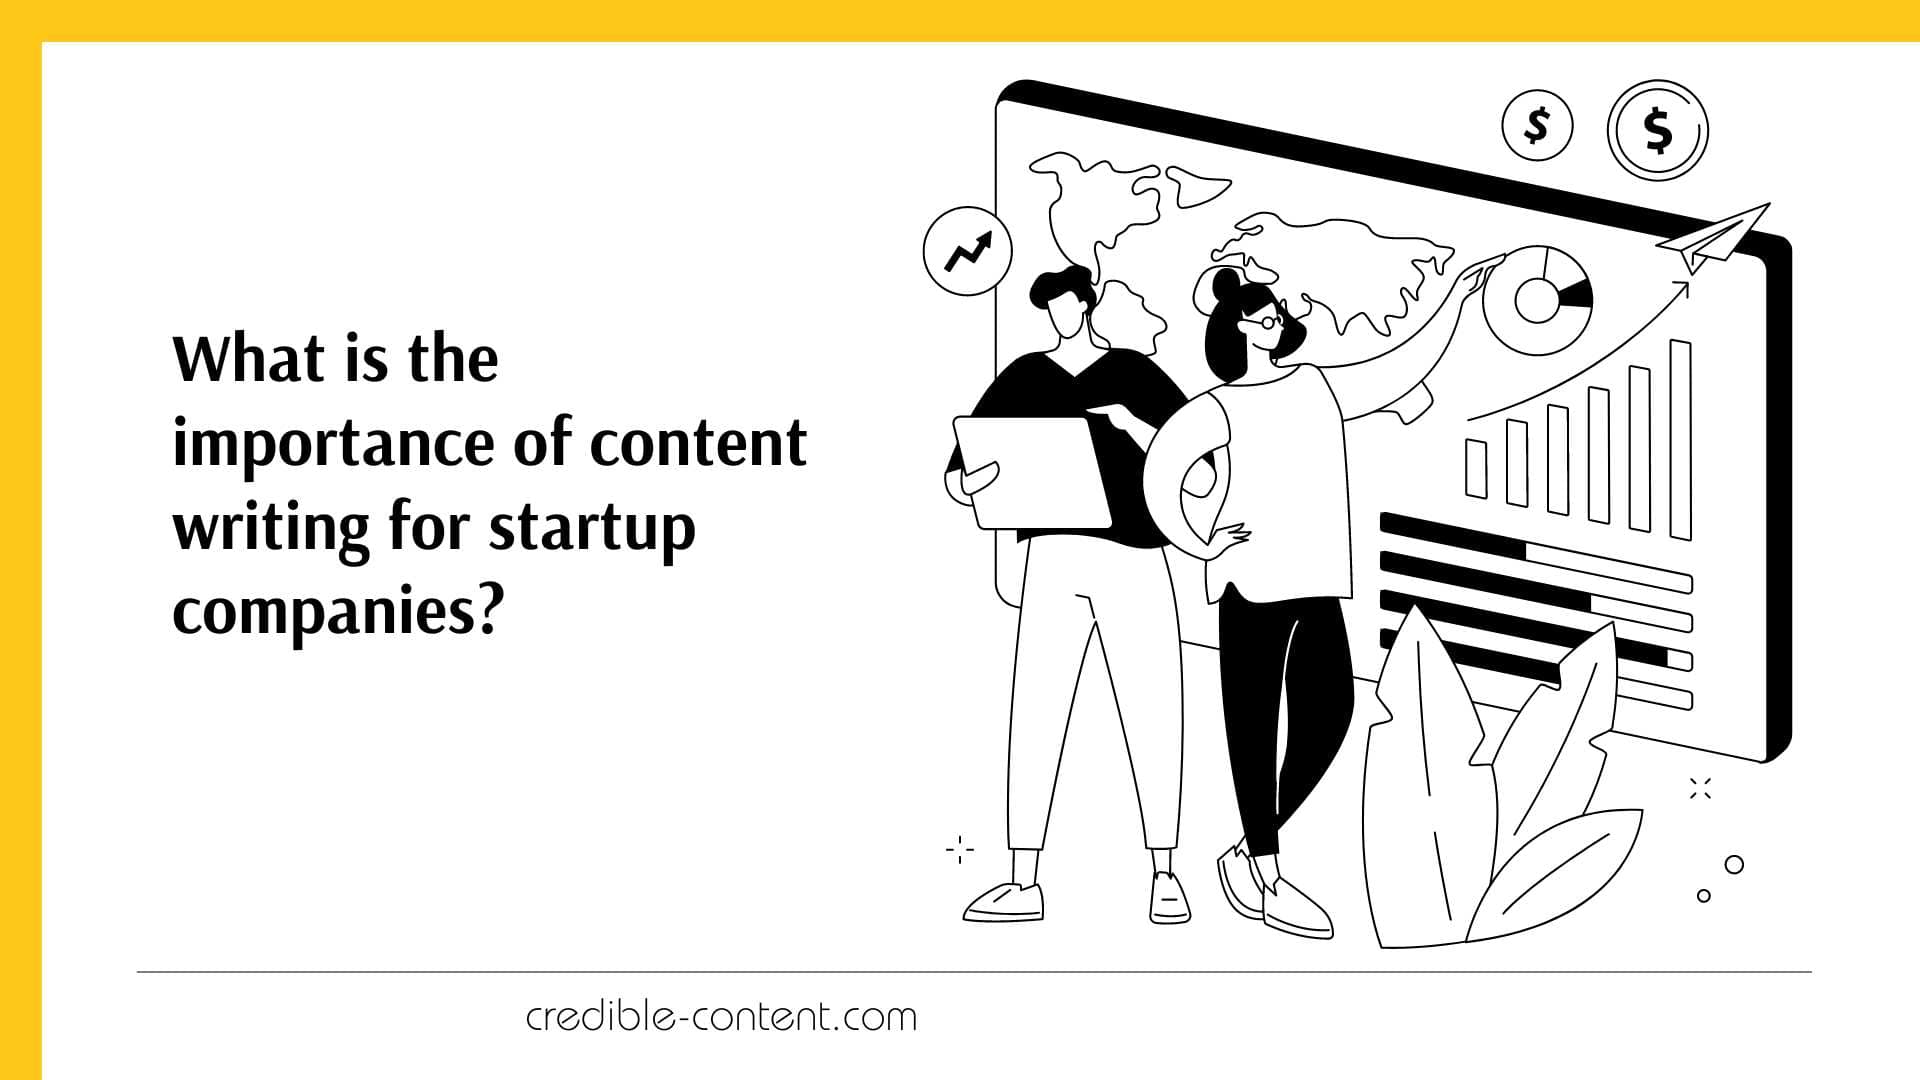 What is the importance of content writing for startup companies